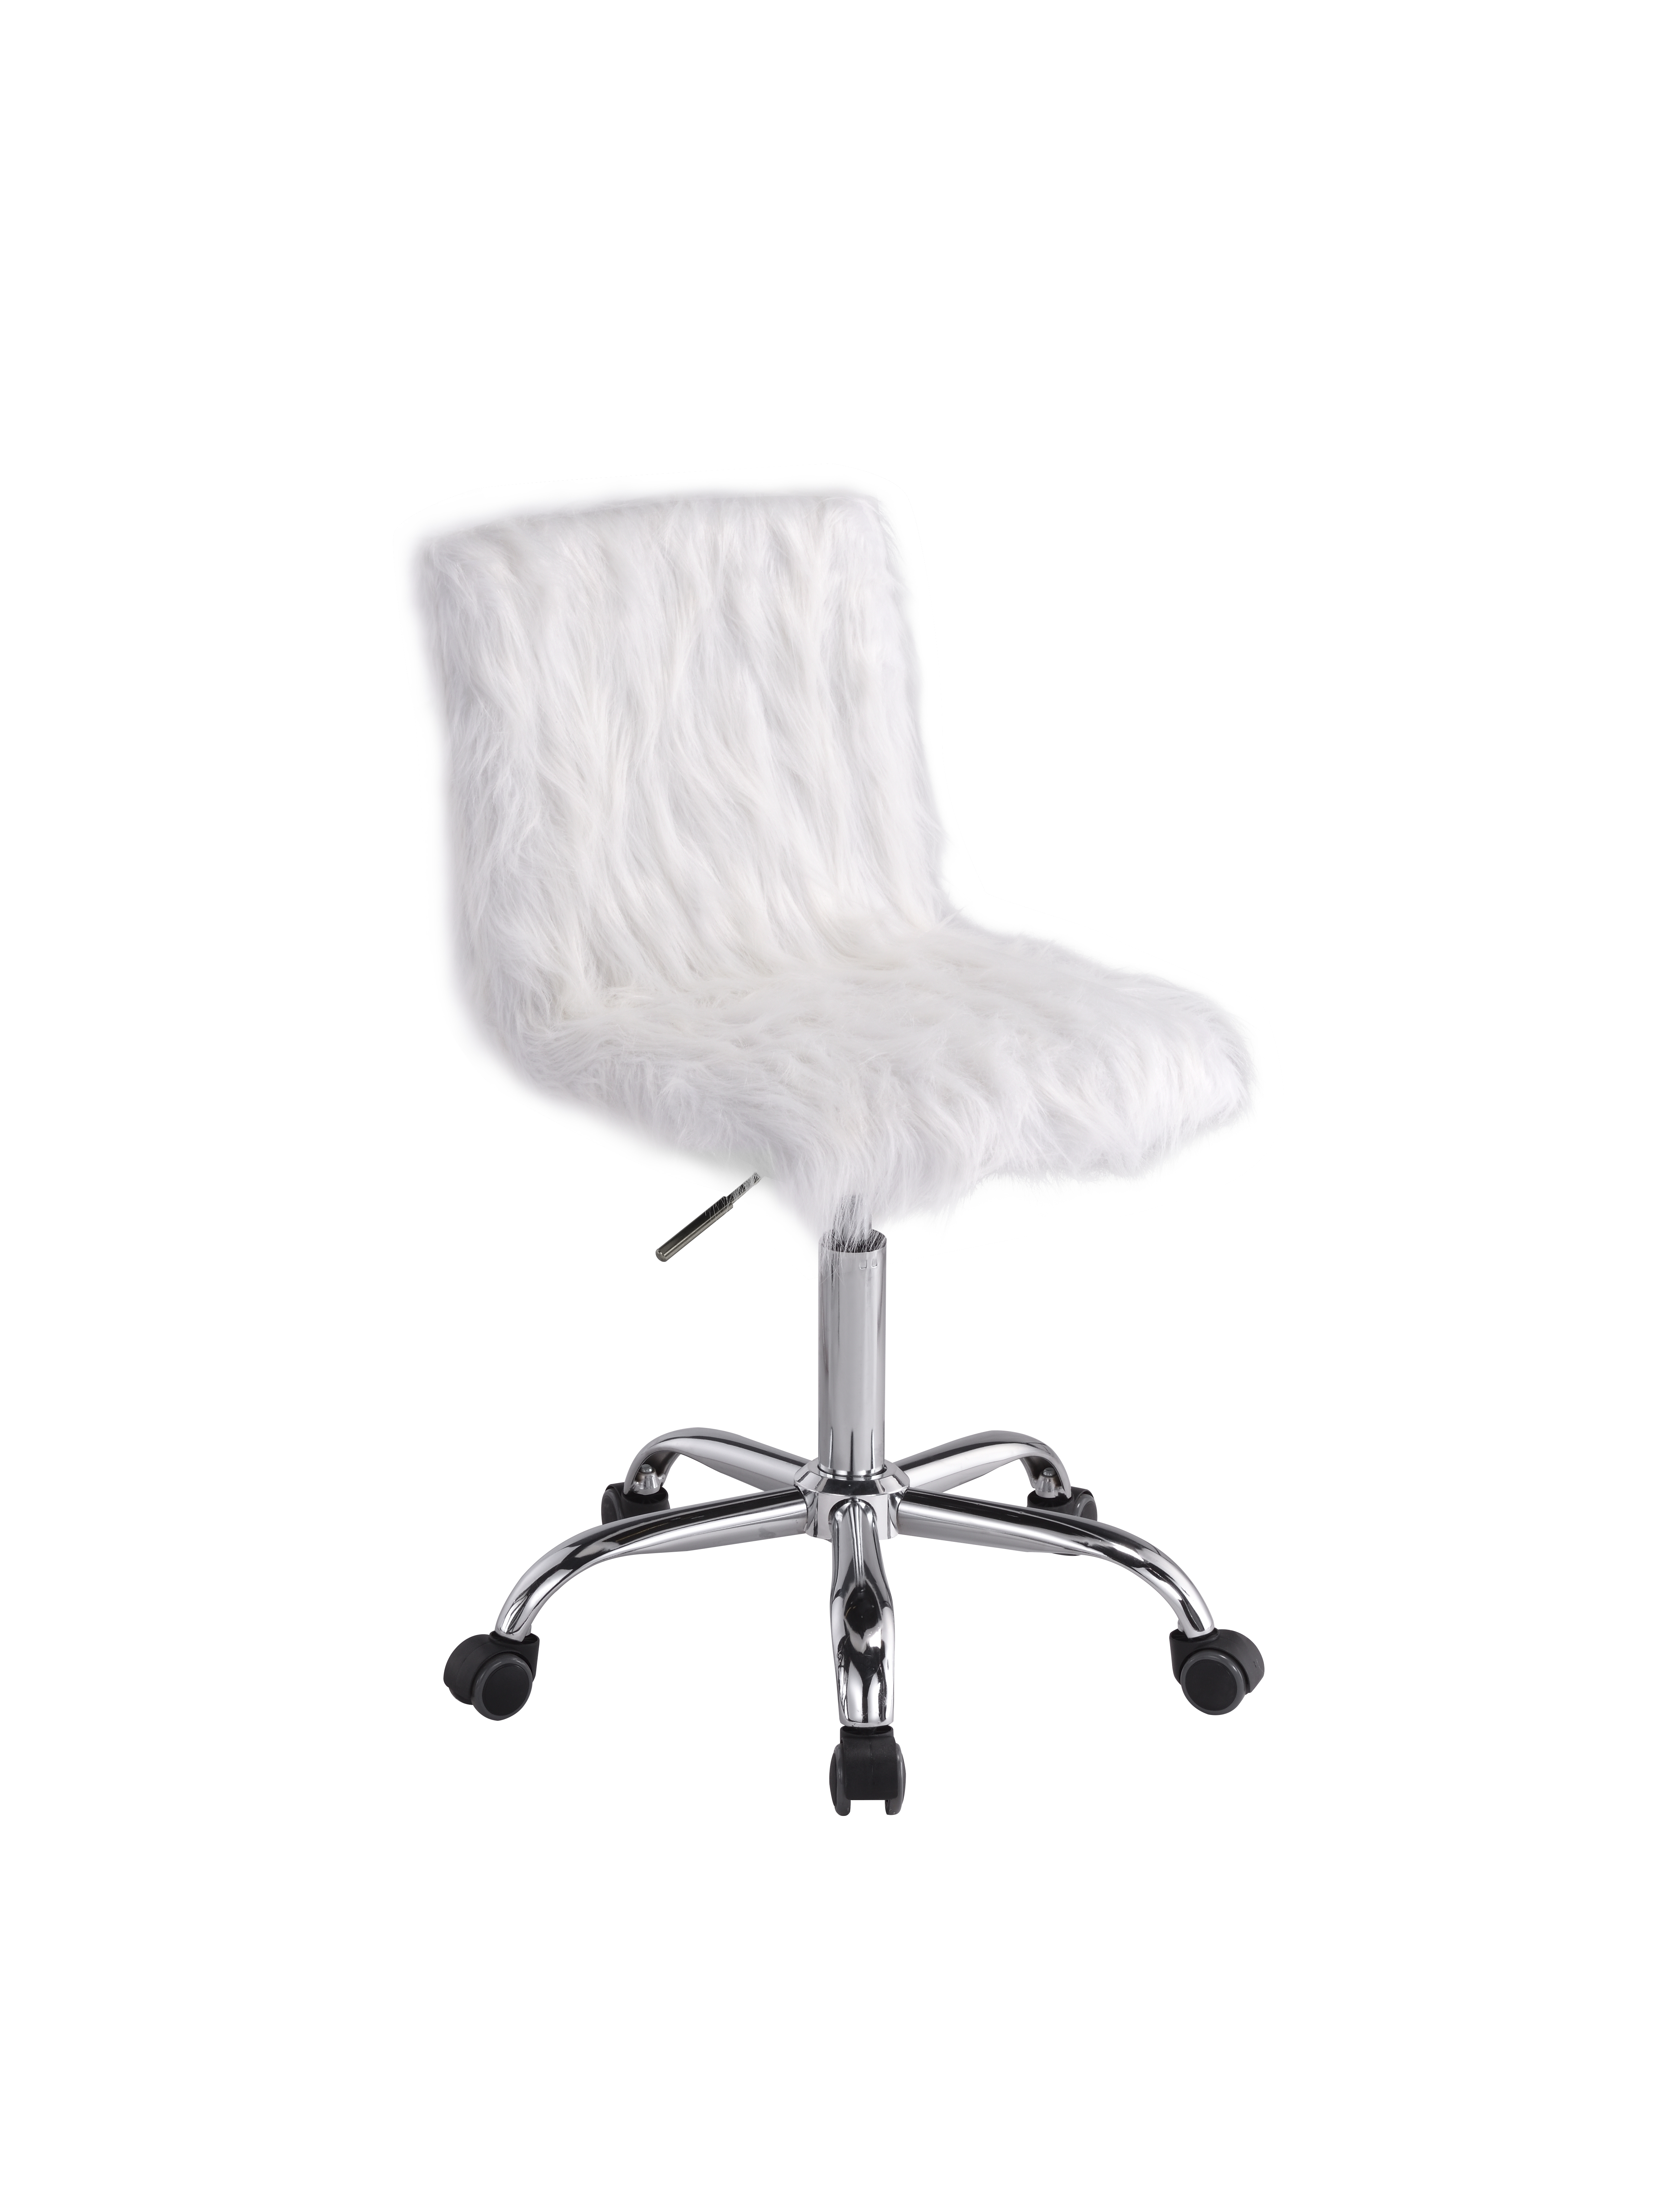 ACME Arundell Office Chair in White Faux Fur  Chrome Finish-Boyel Living